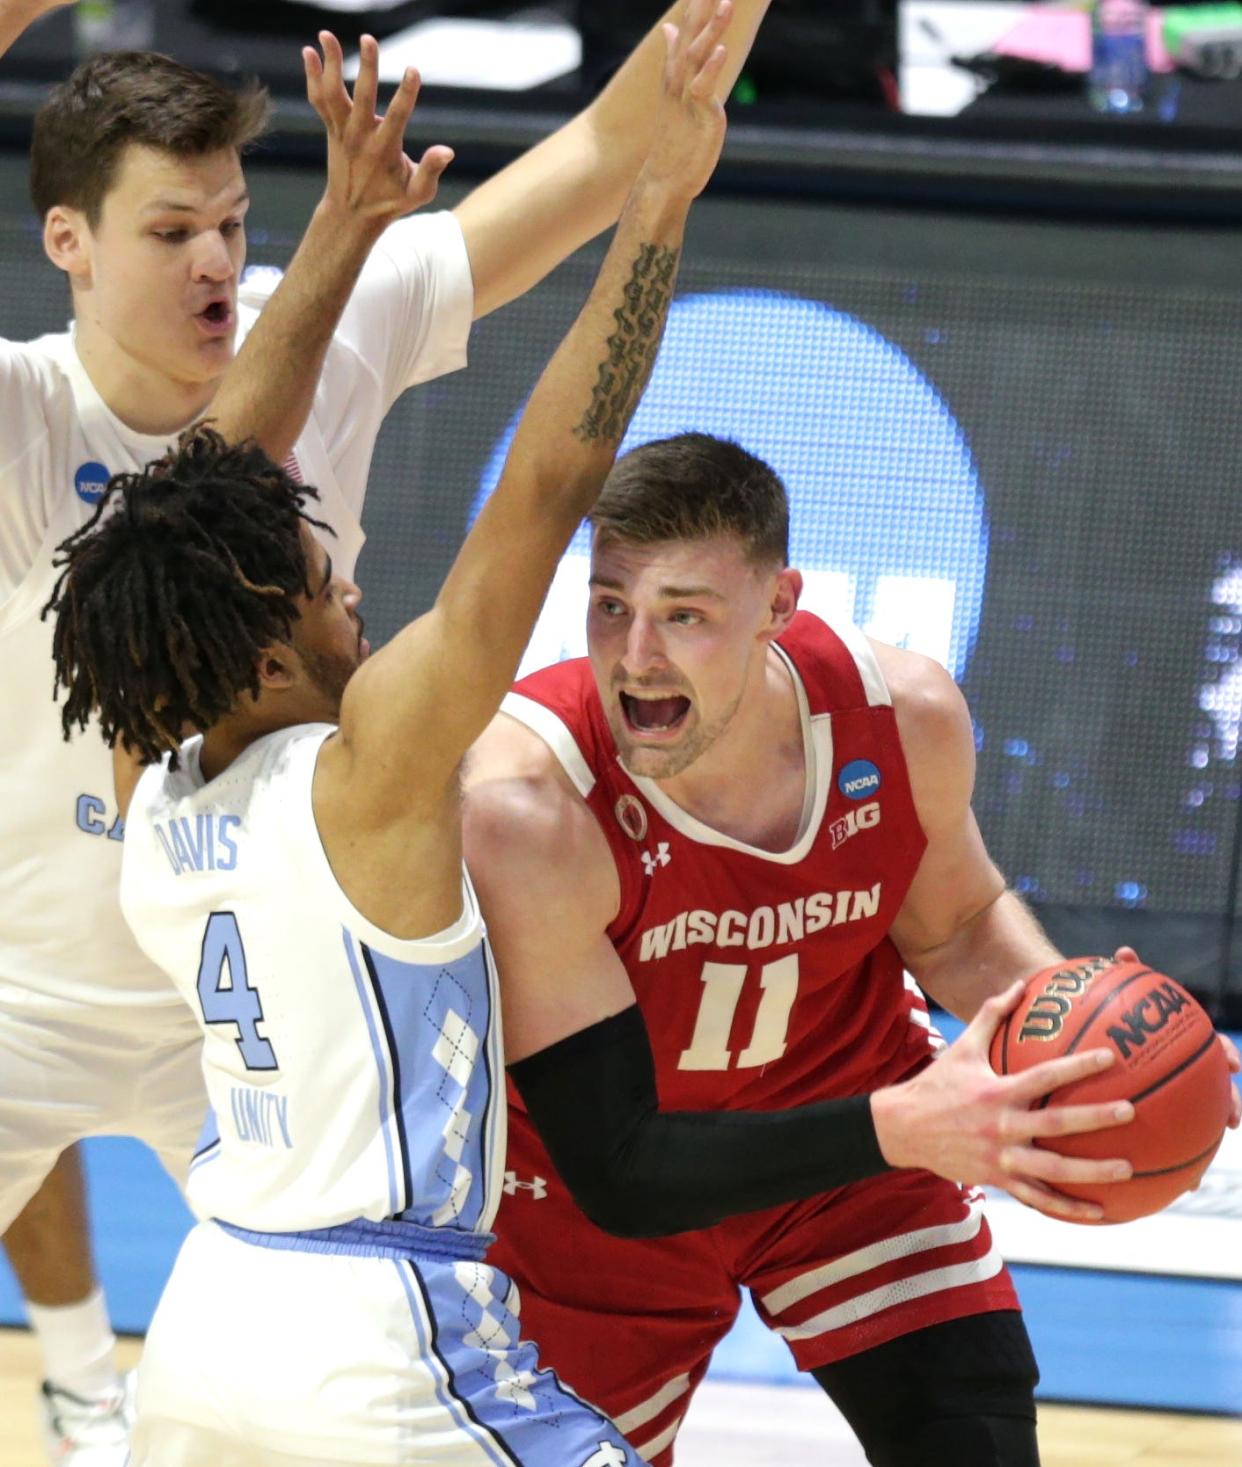 Badgers forward Micah Potter looks for a teammate to pass to while being double teamed by North Carolina's R.J. Davis (4) and Walker Kessler.